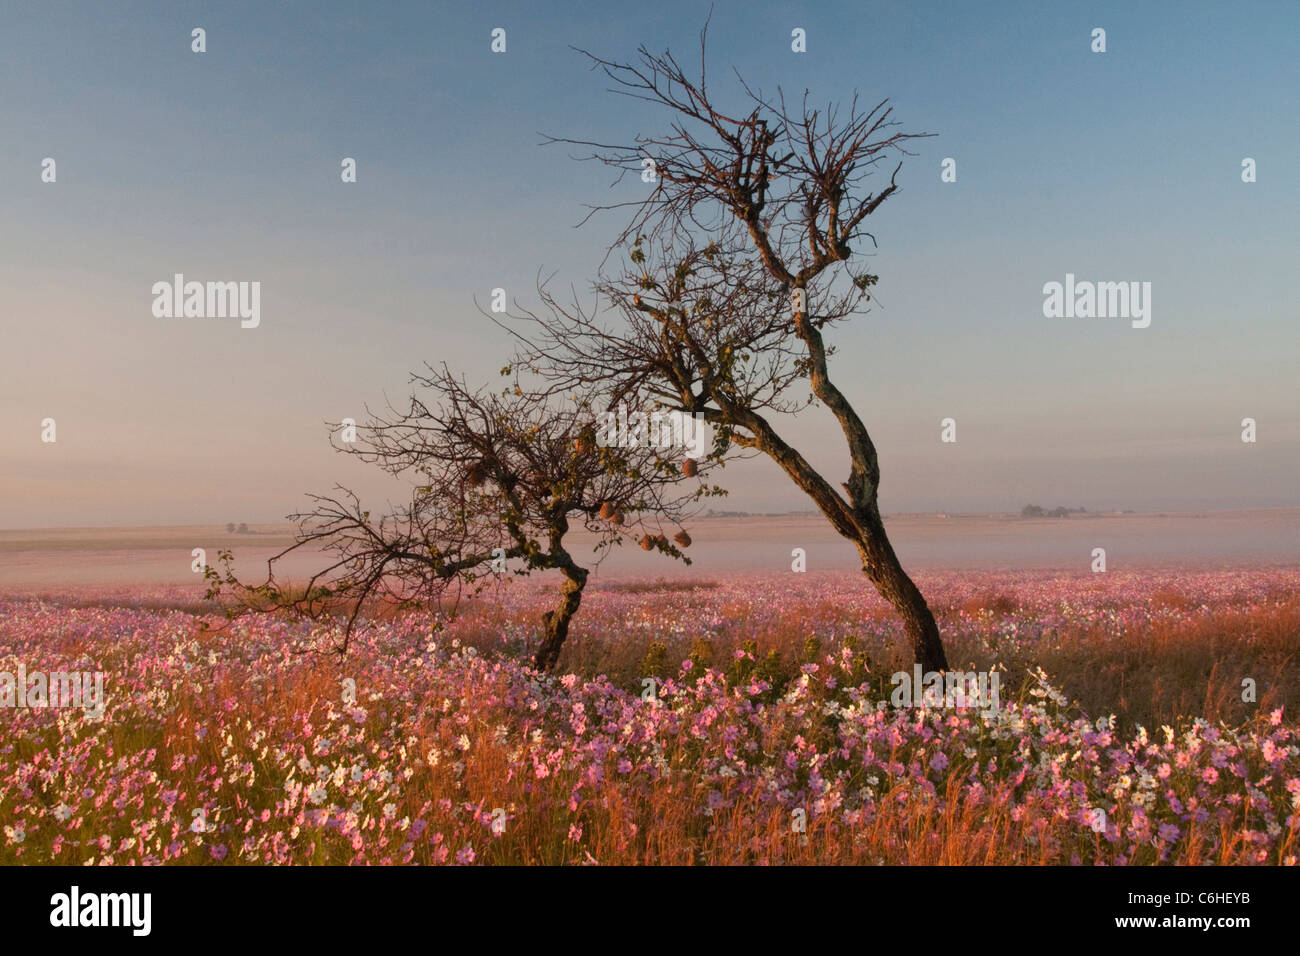 Highveld landscape with a leafless trees surrounded by a field of cosmos and mist in a distant valley Stock Photo